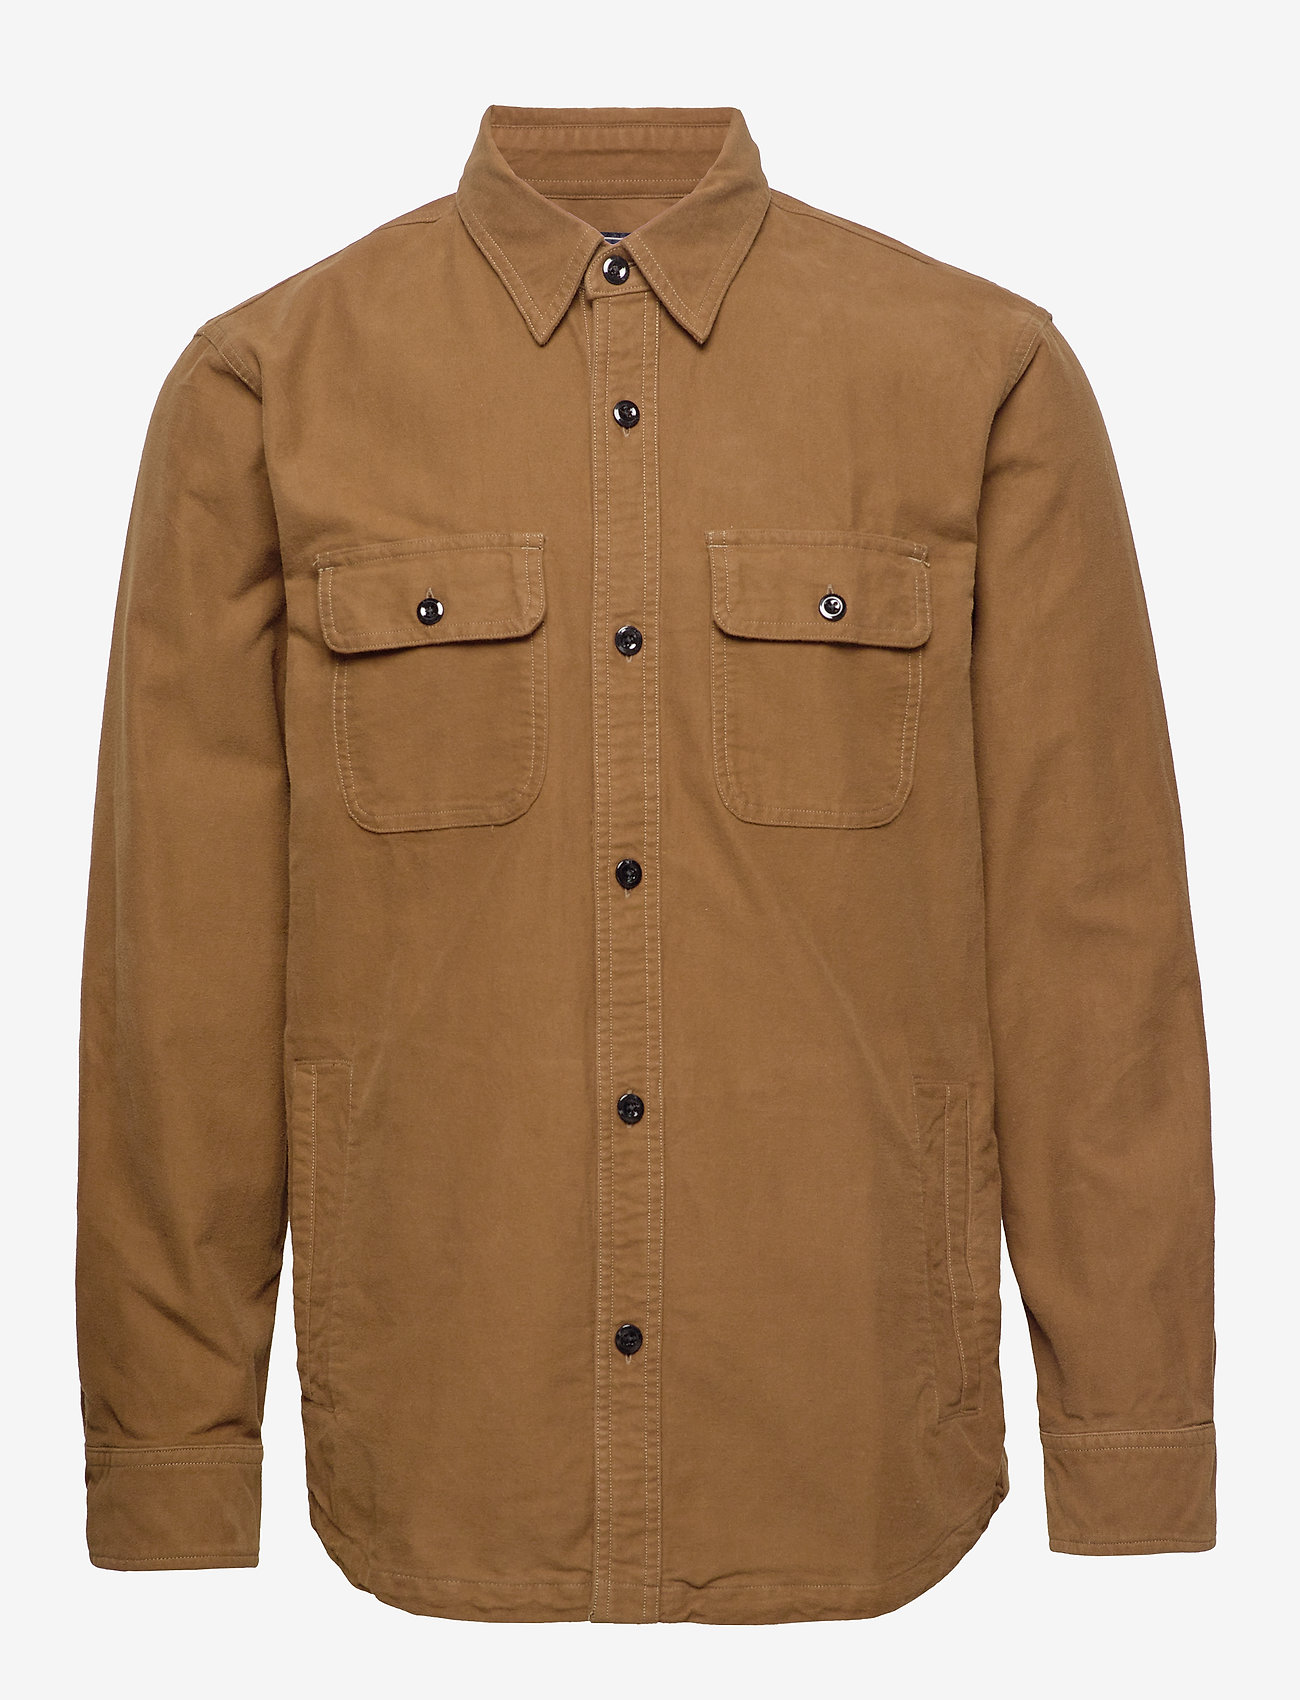 abercrombie fitch shirt jacket